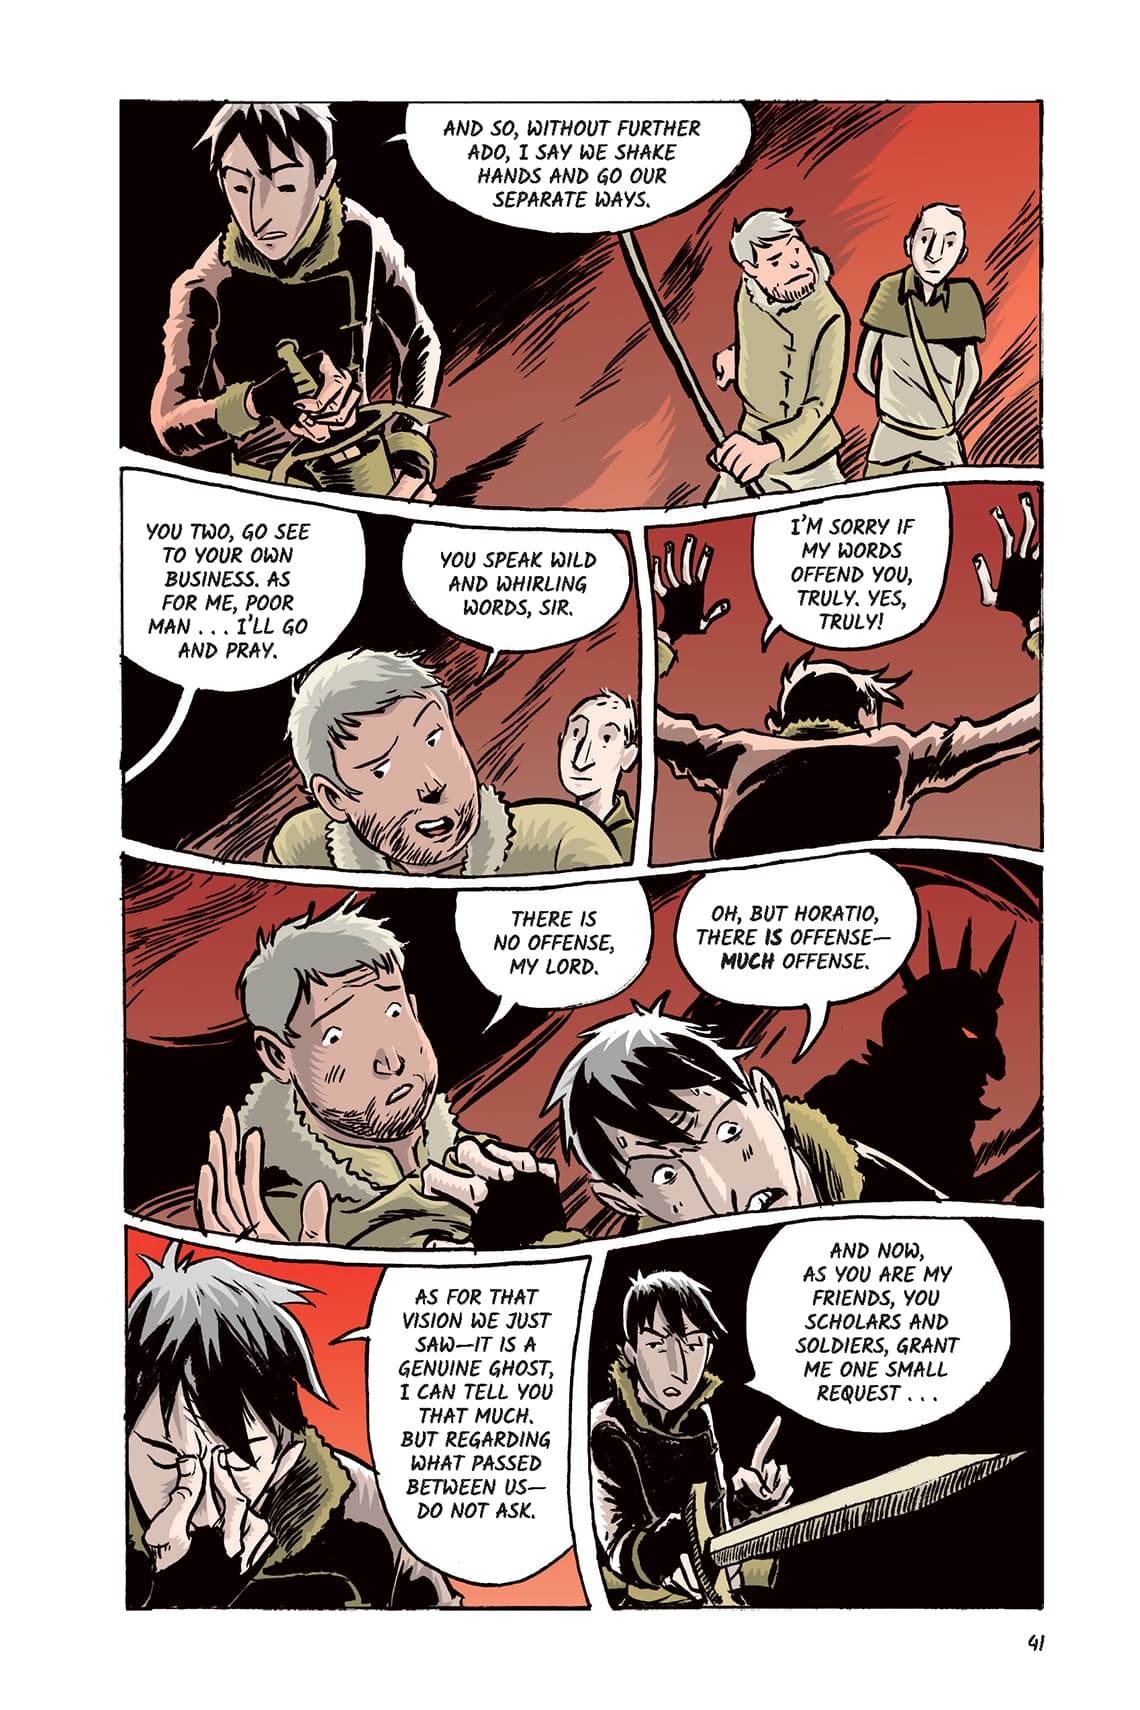 Hamlet Act 1 Scene 5 Page 41 Graphic Novel SparkNotes